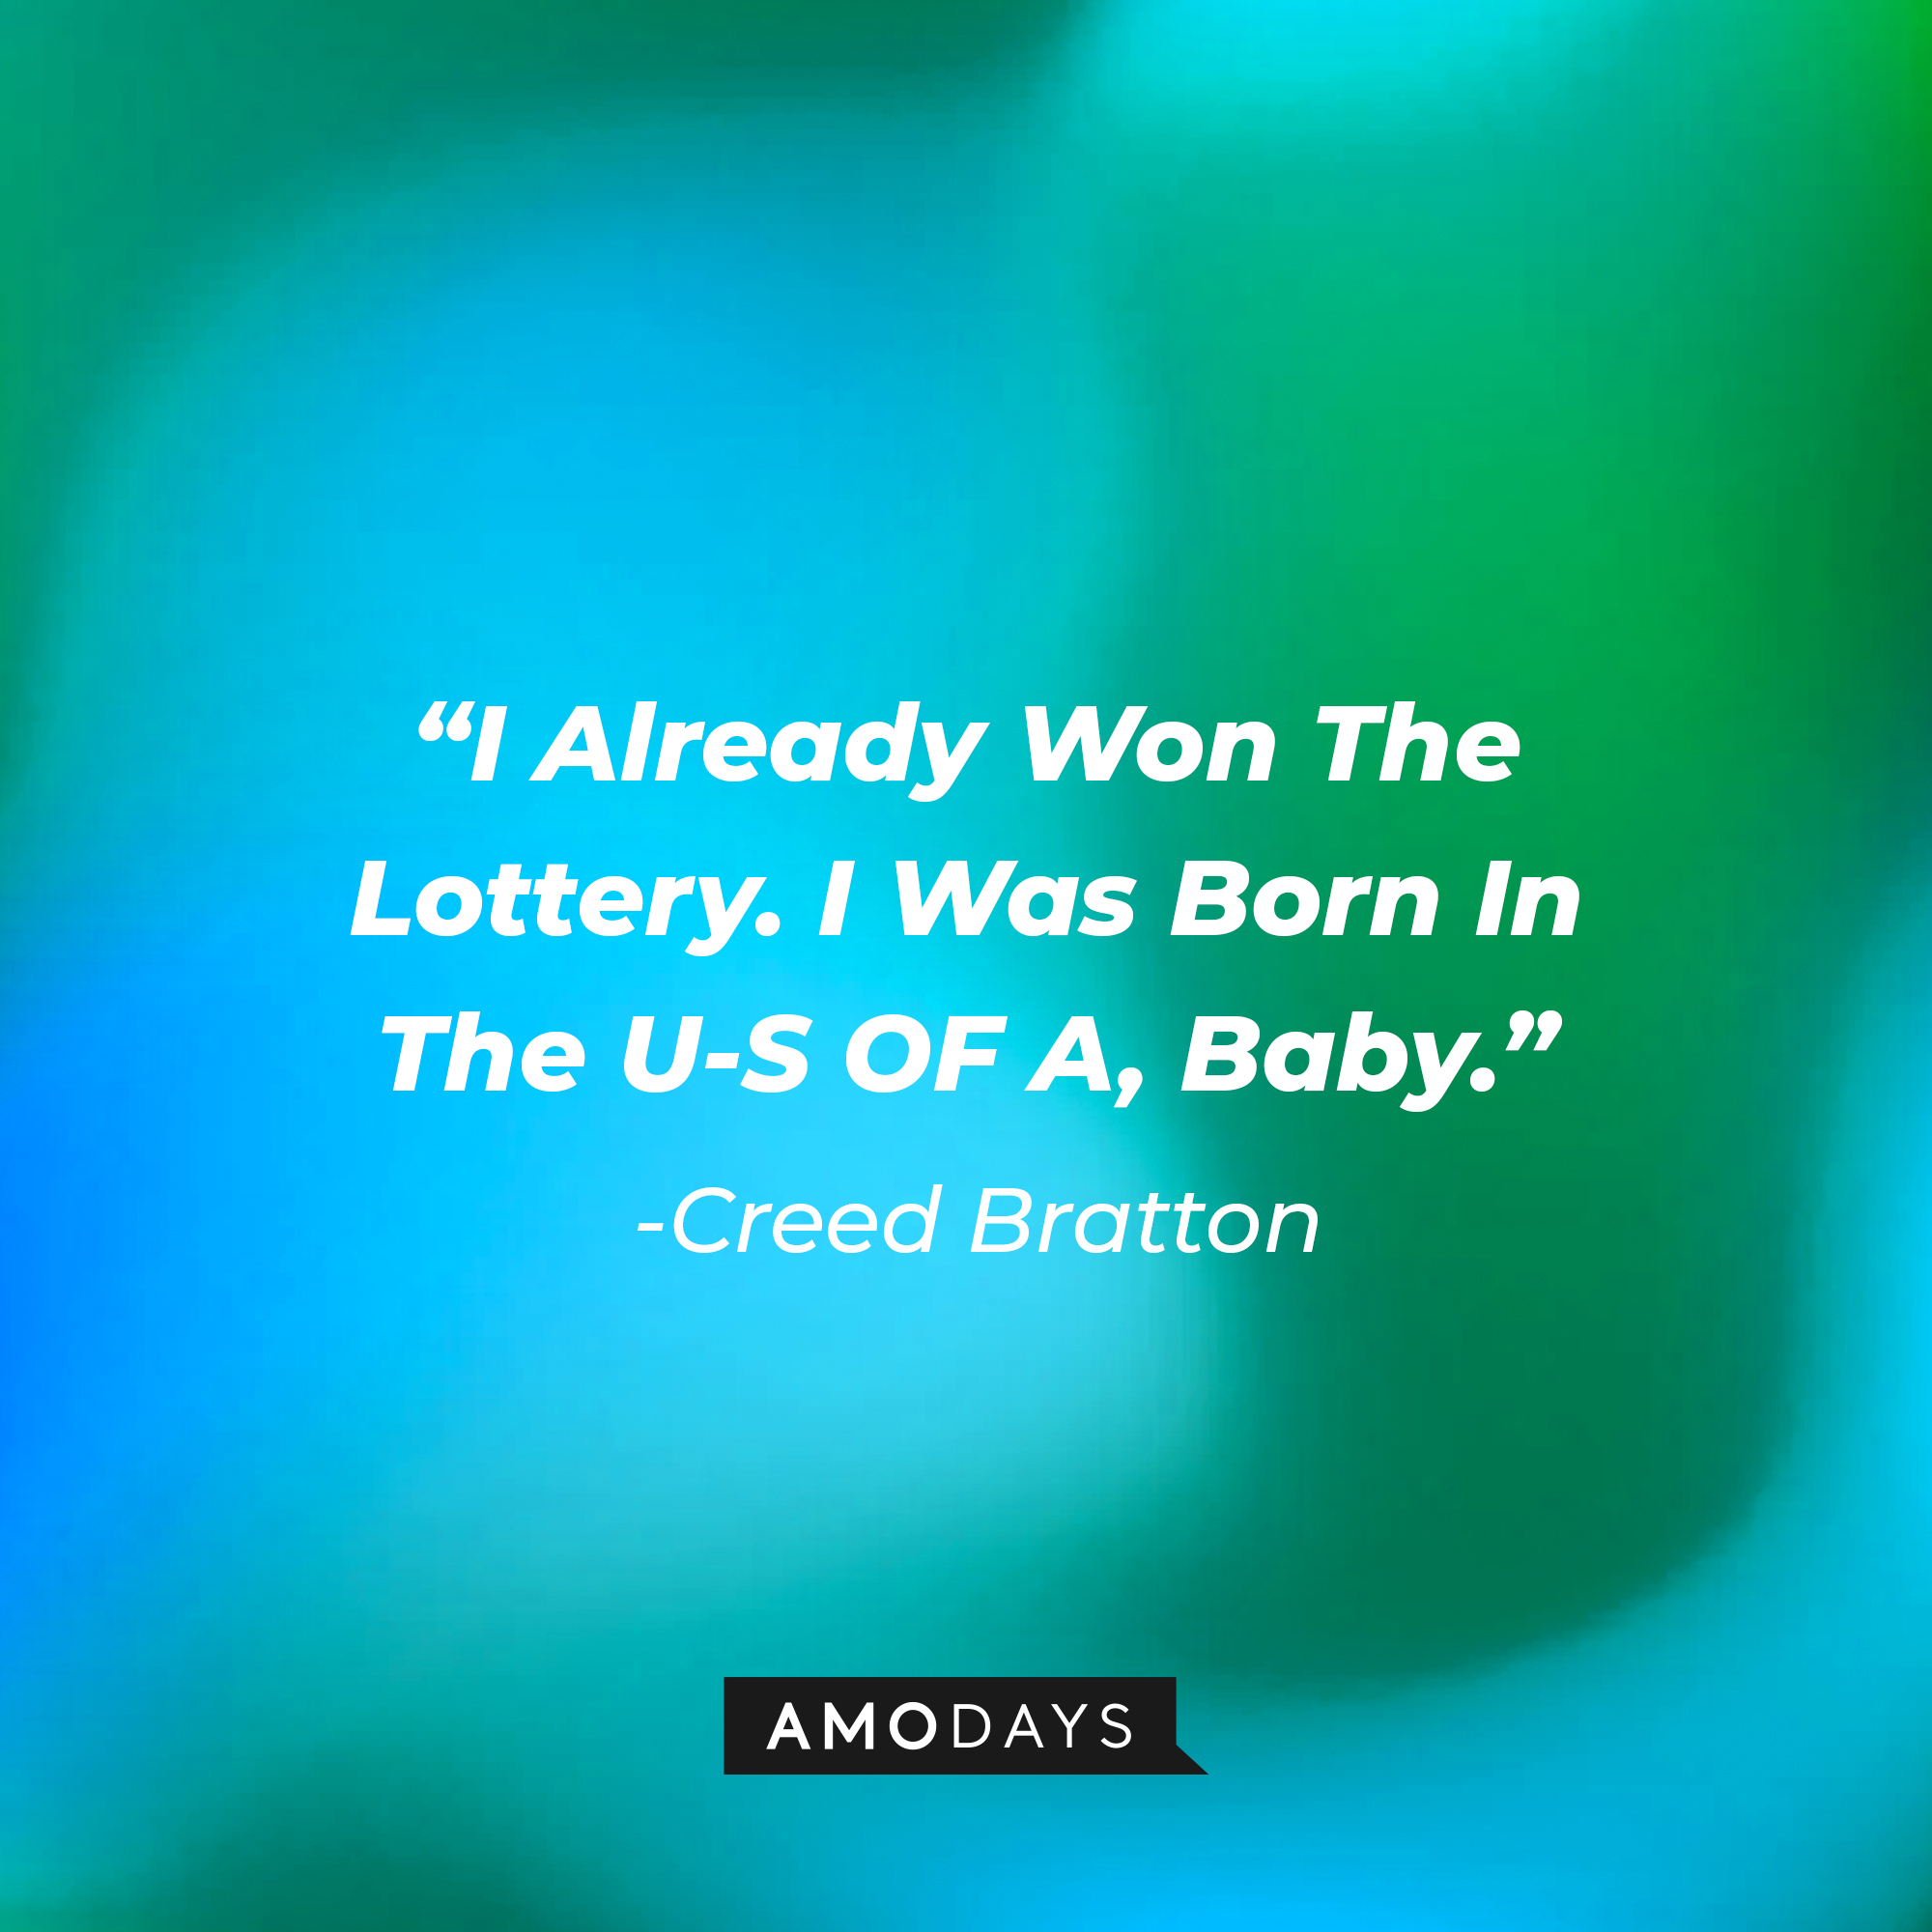 Creed Bratton's quote: "I Already Won The Lottery. I Was Born in The U-S Of A, Baby." | Source: Amodays